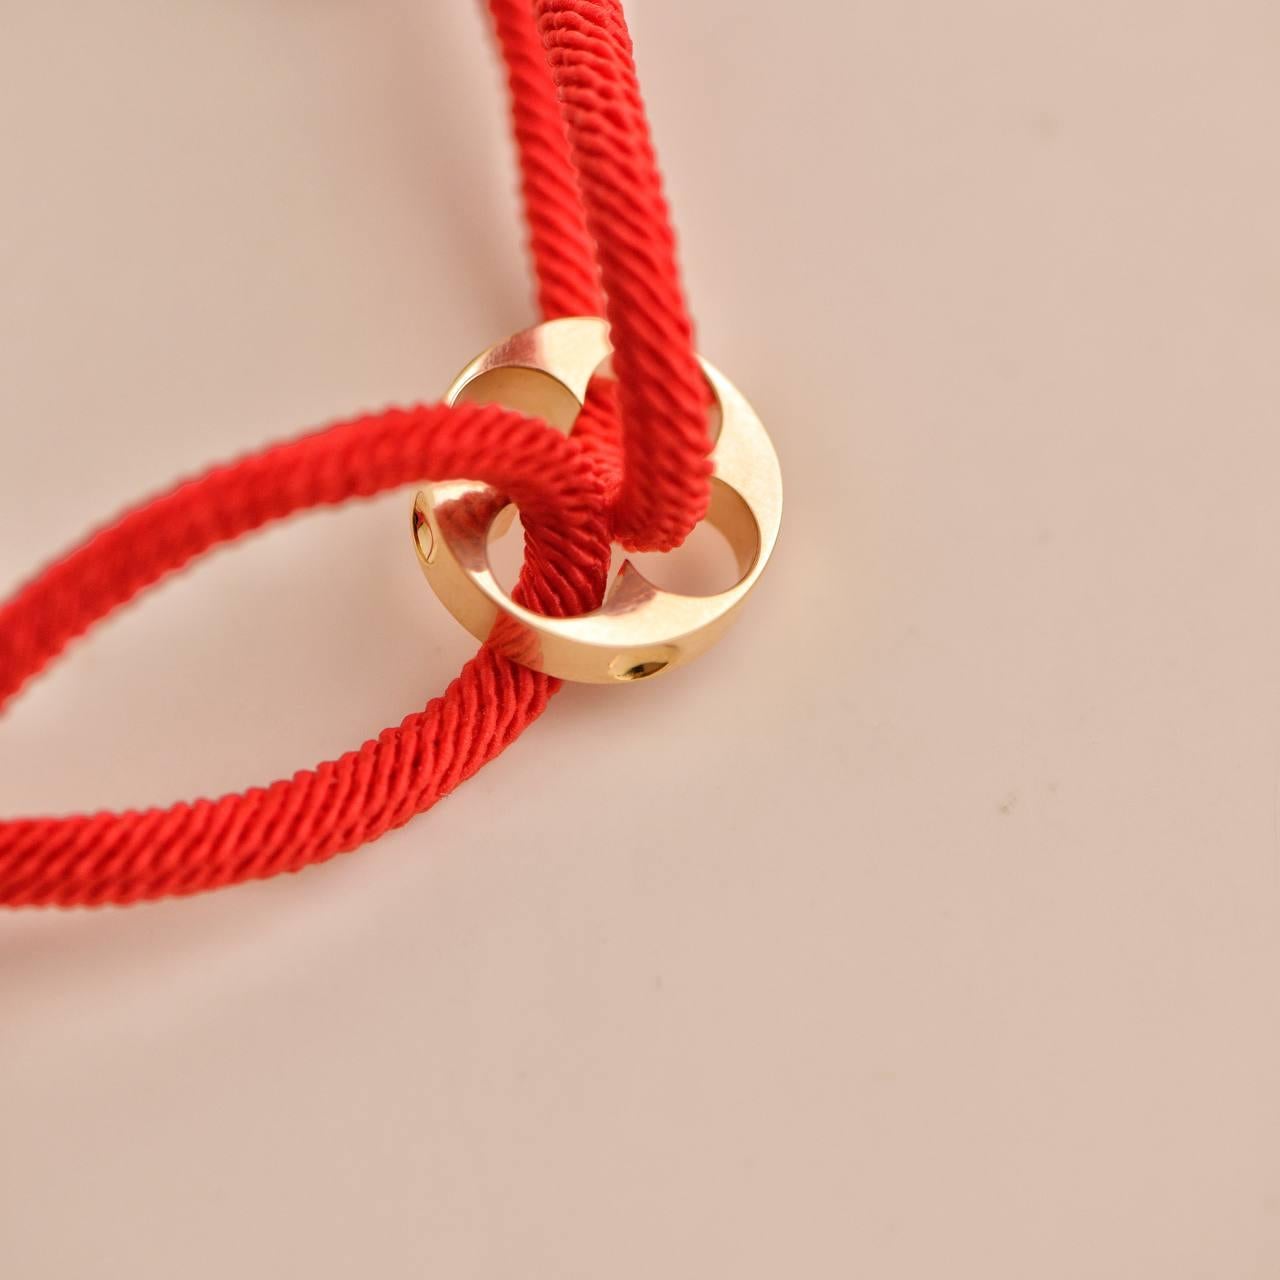 Louis Vuitton Empreinte 18K Yellow Gold Red Cord Bracelet In Excellent Condition For Sale In Banbury, GB